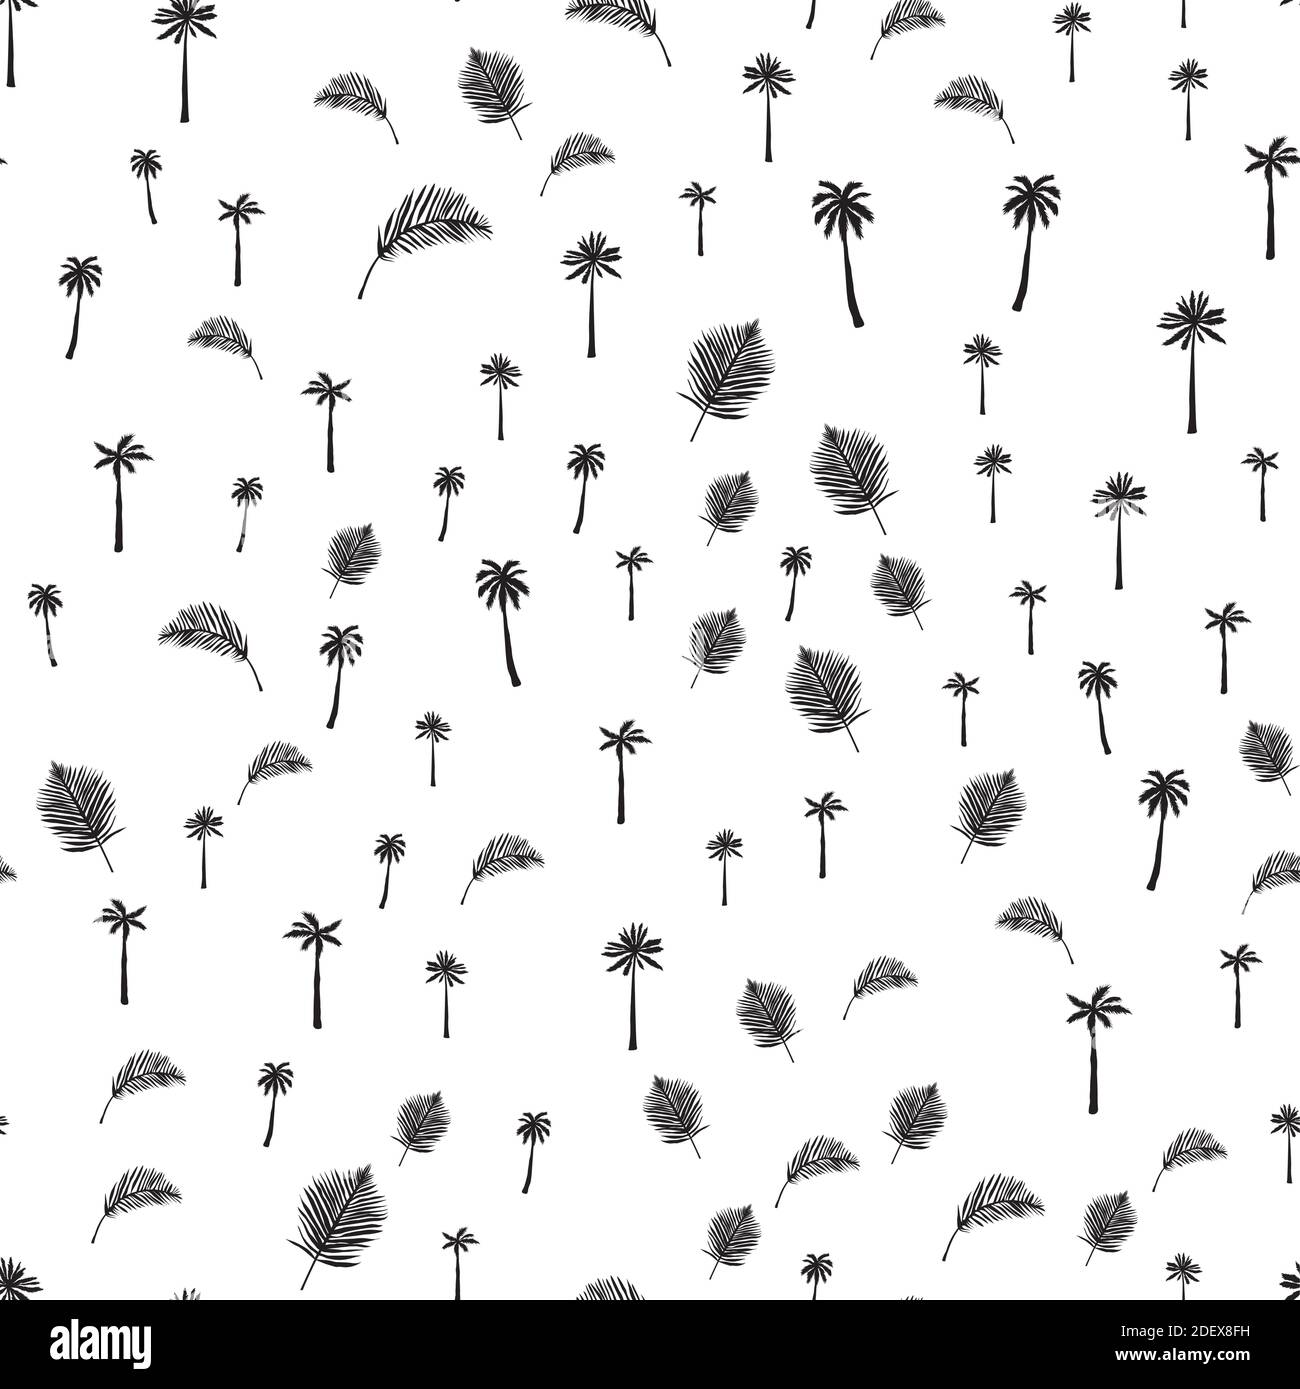 Palm trees. Seamless pattern. Vector illustration on a white background. Stock Vector